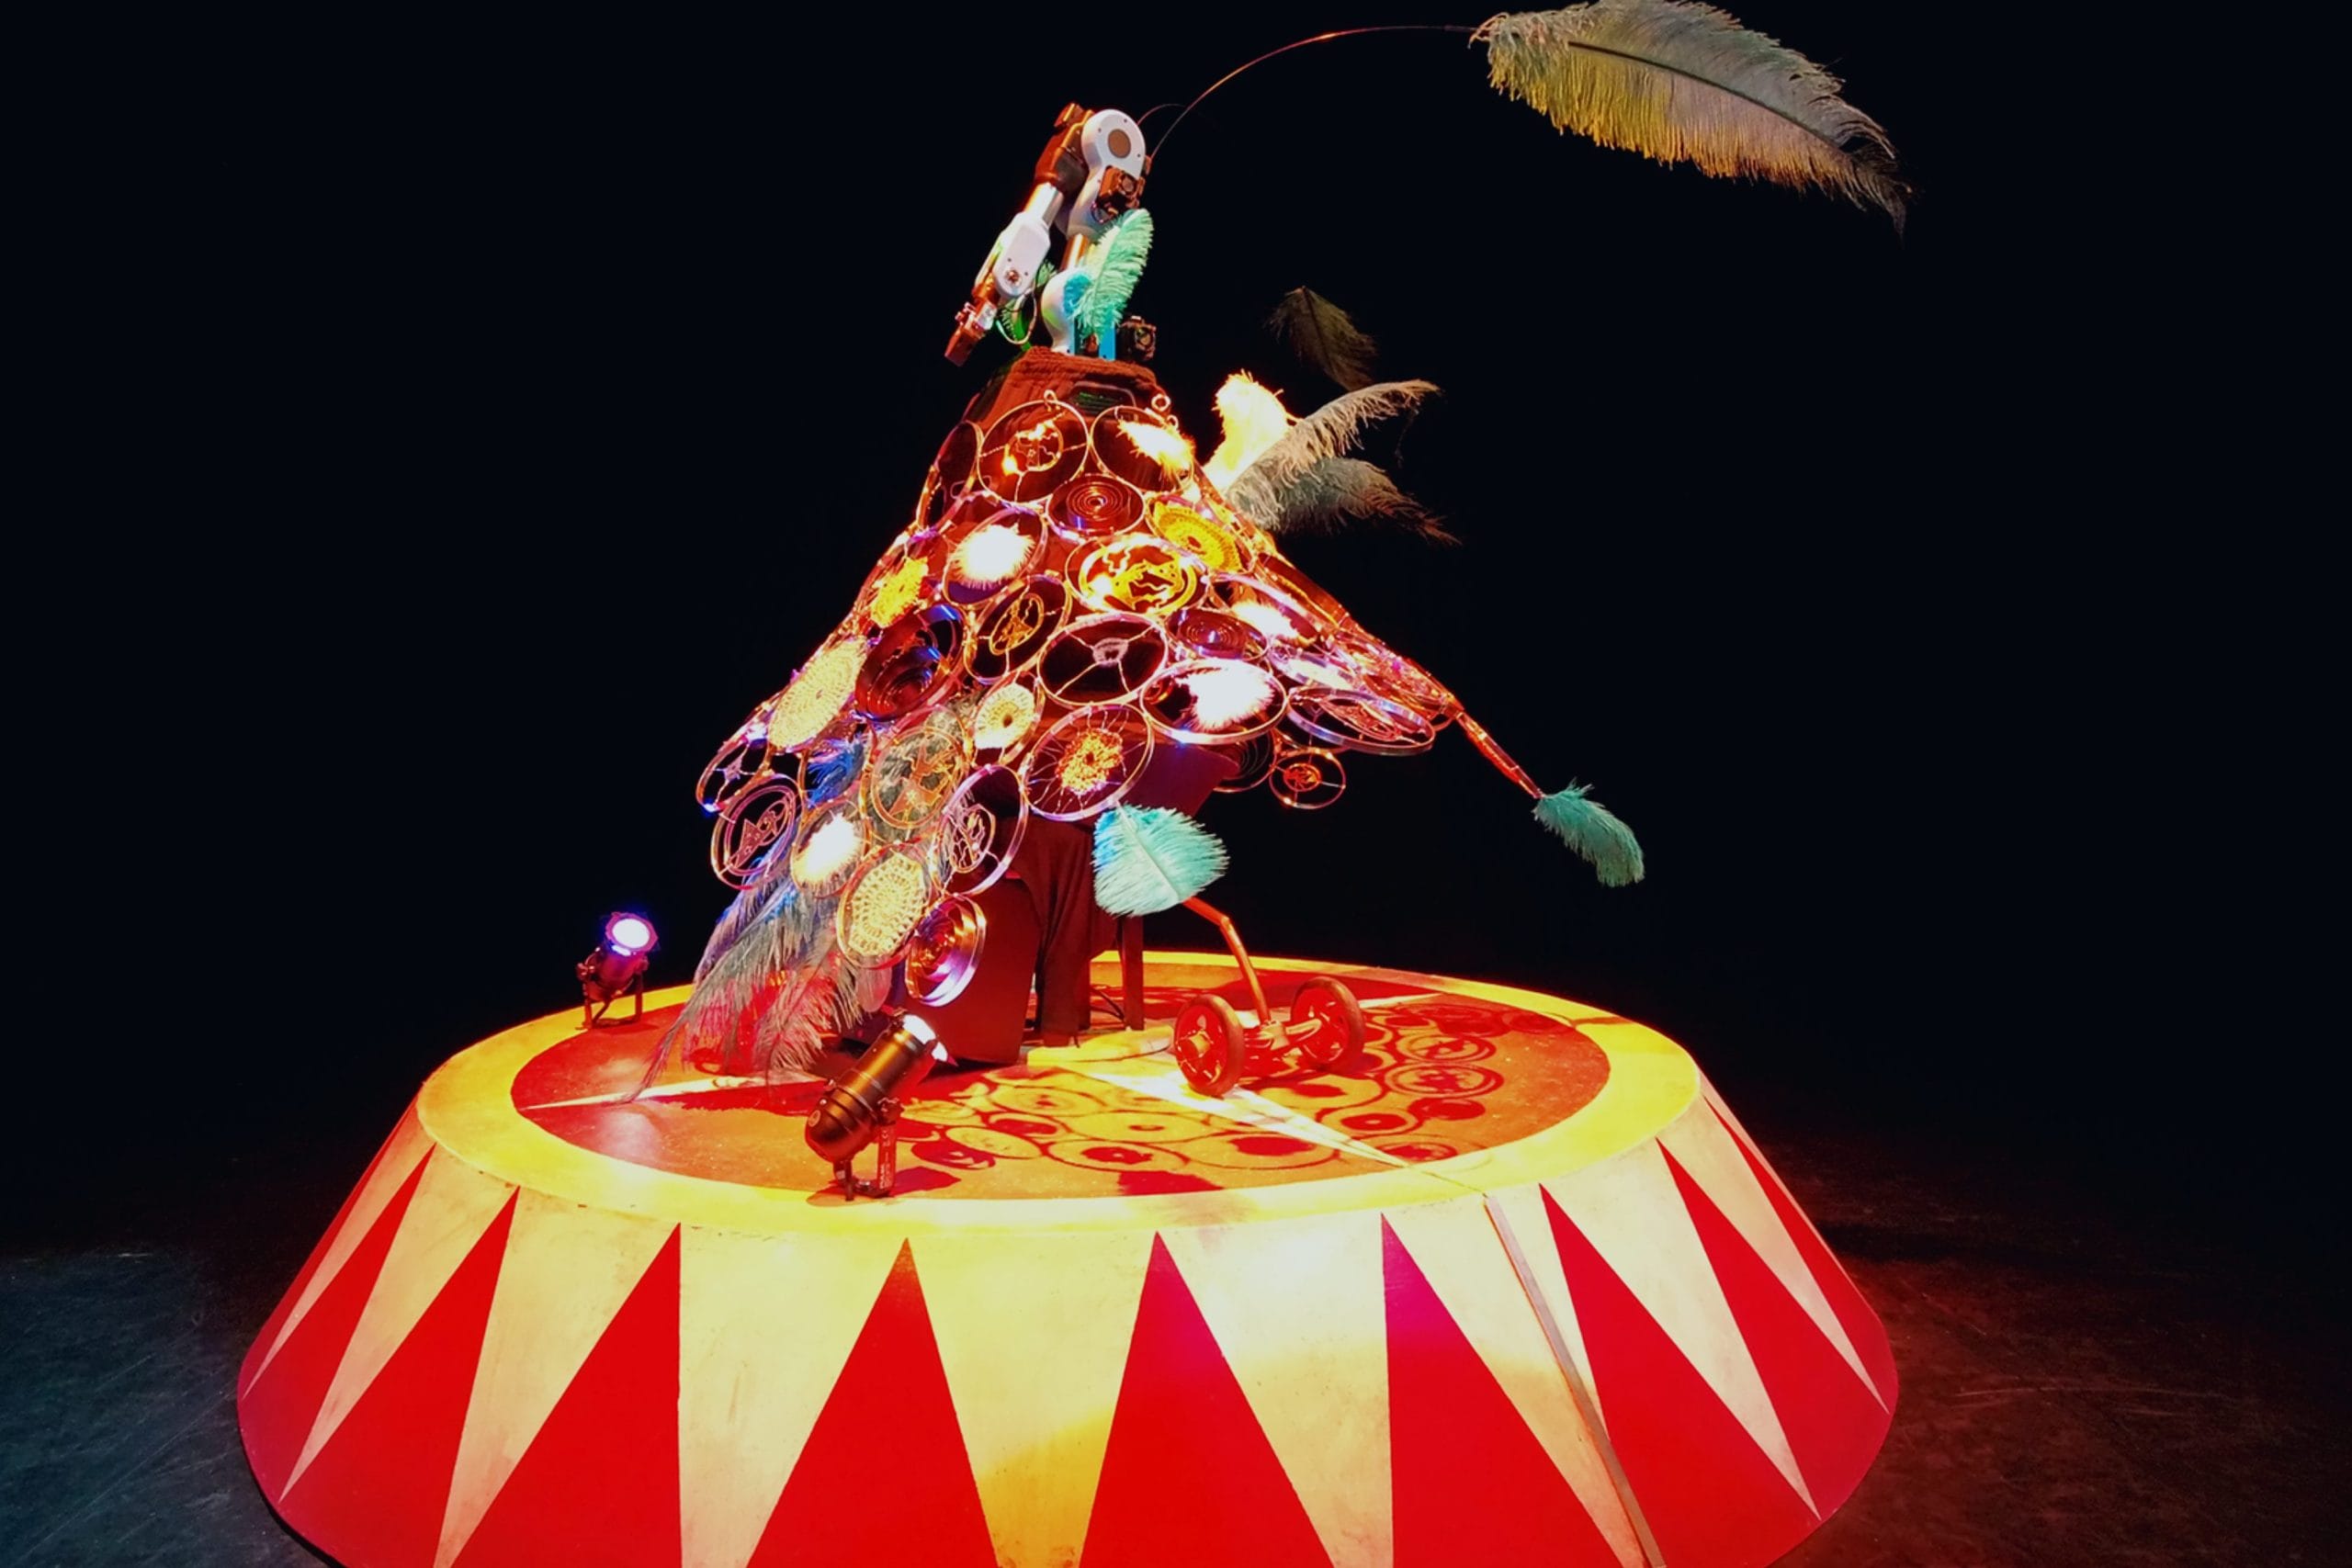 A red and yellow circus tent style stand with a spinning feather contraption